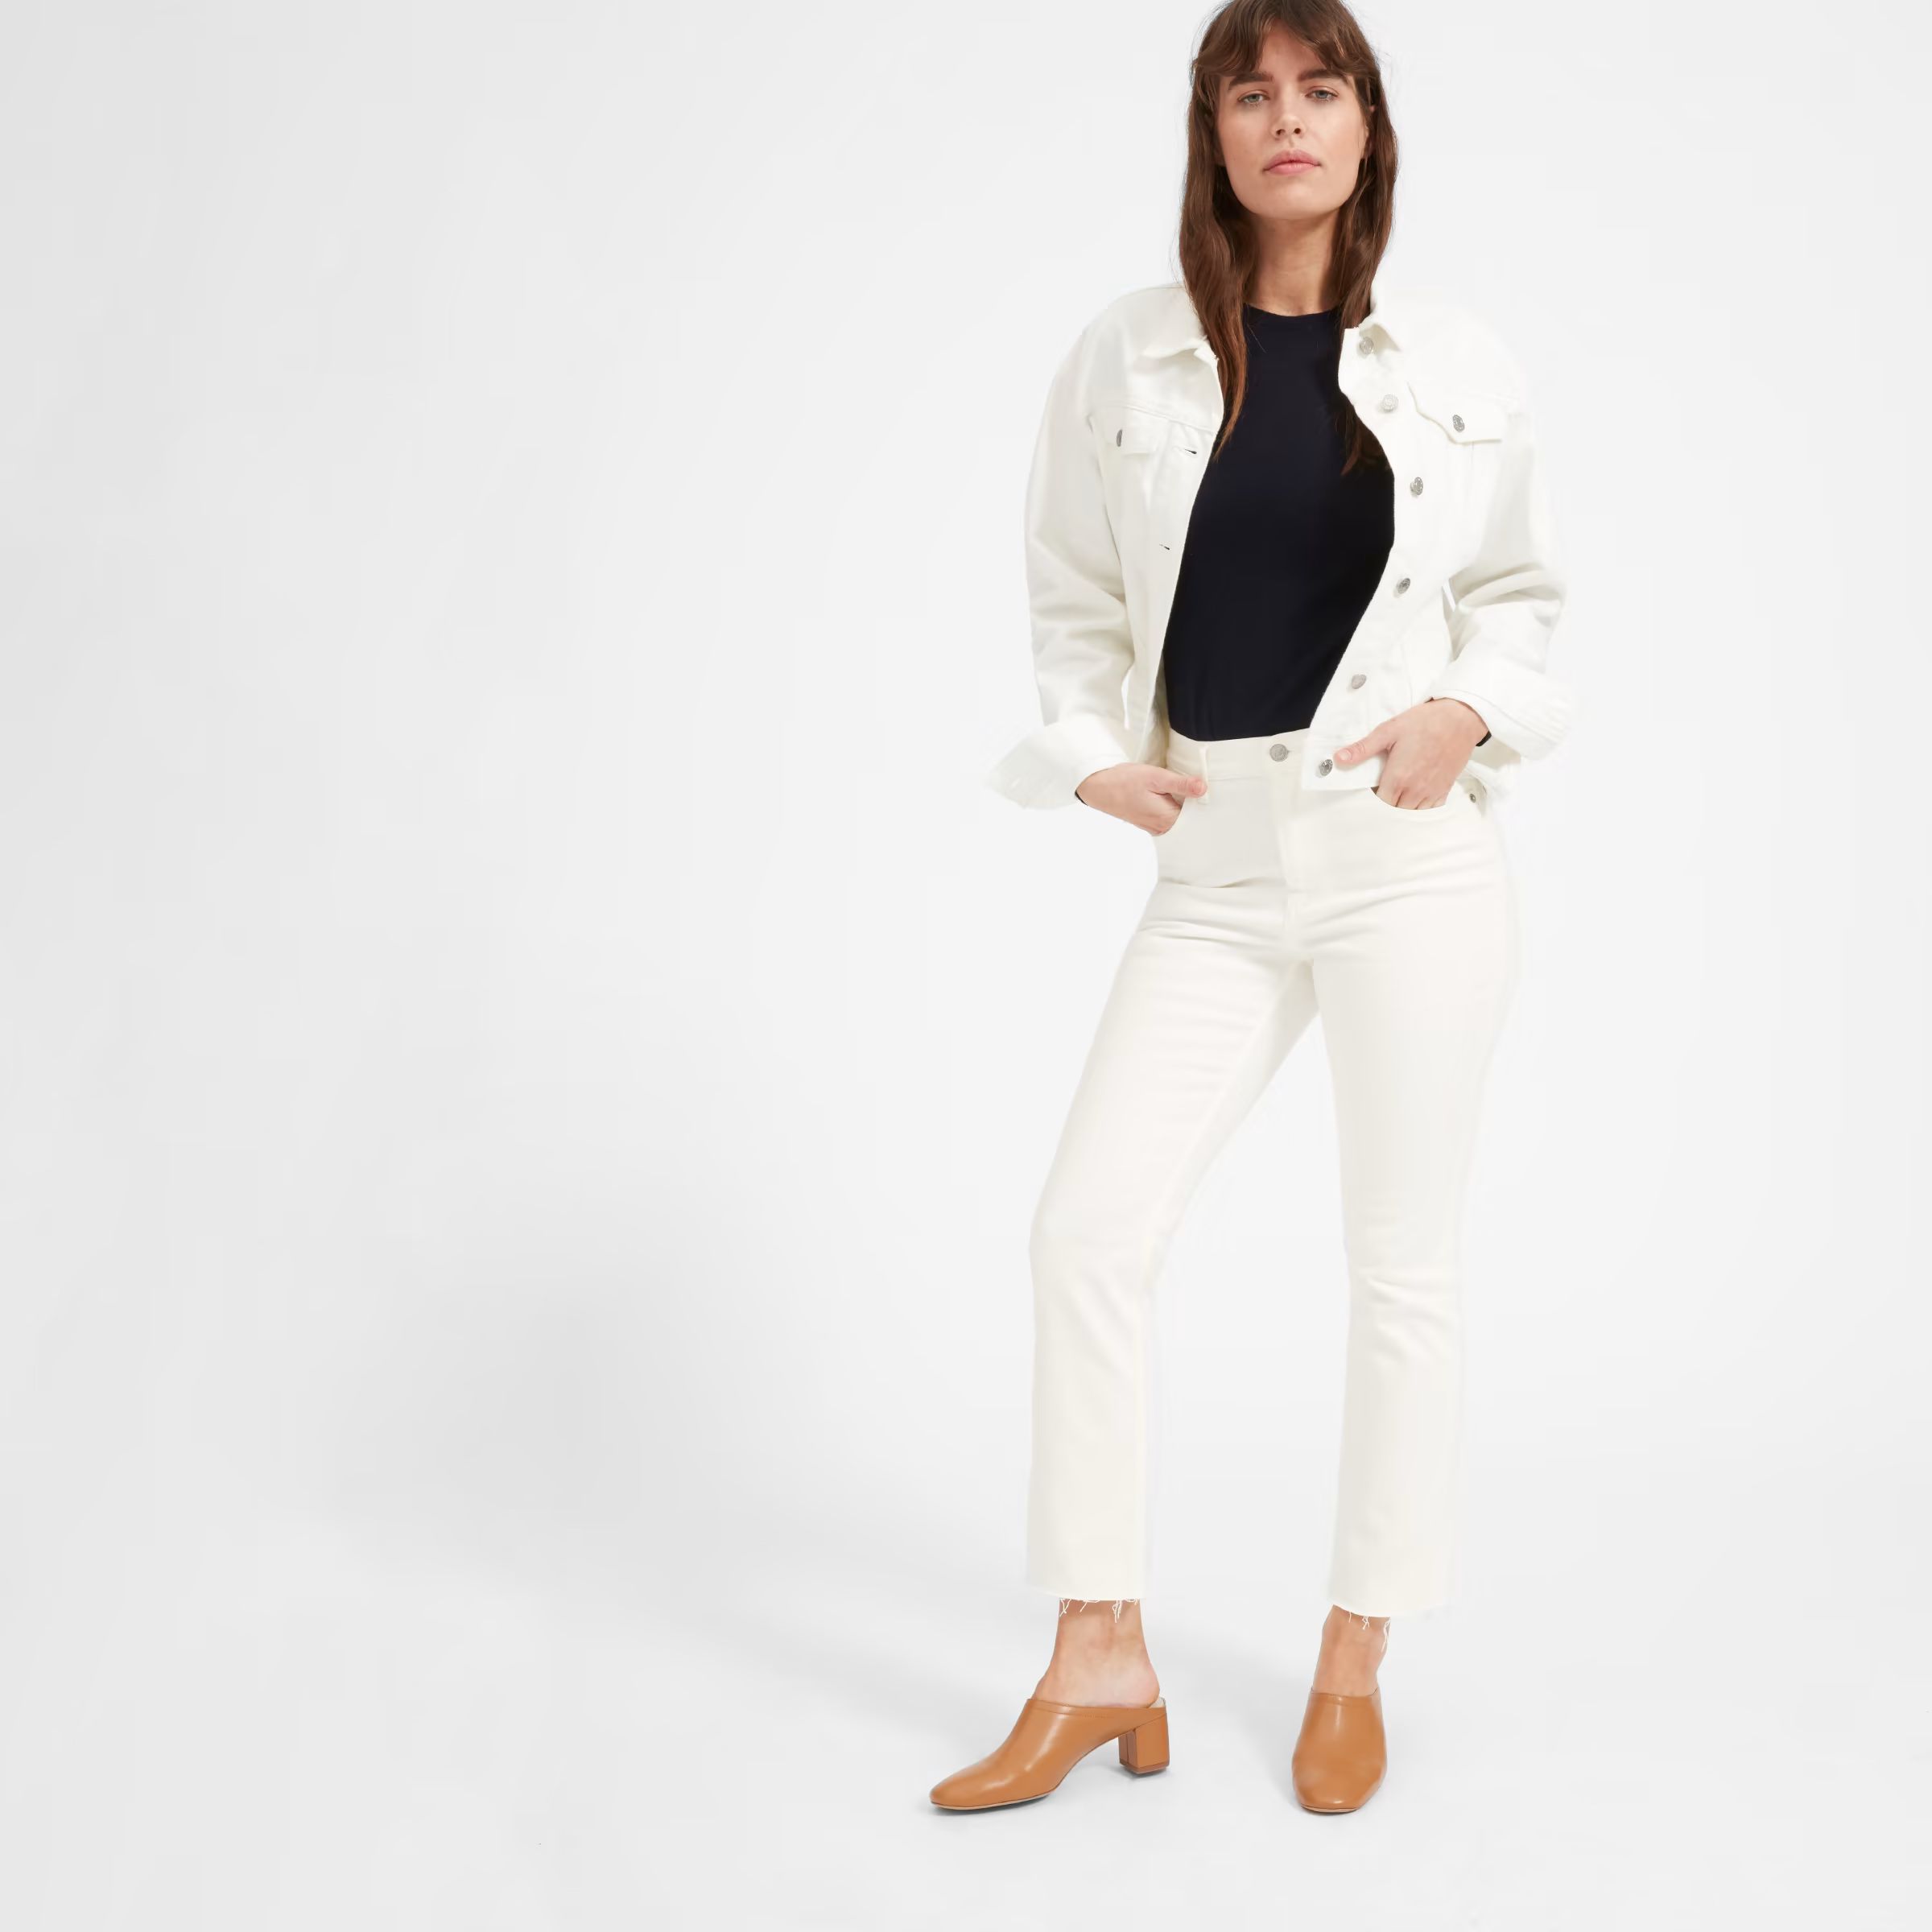 DetailsMacara is 5'9", size 2, wearing a 26Fits slim through the thigh and leg, with a slight fla... | Everlane